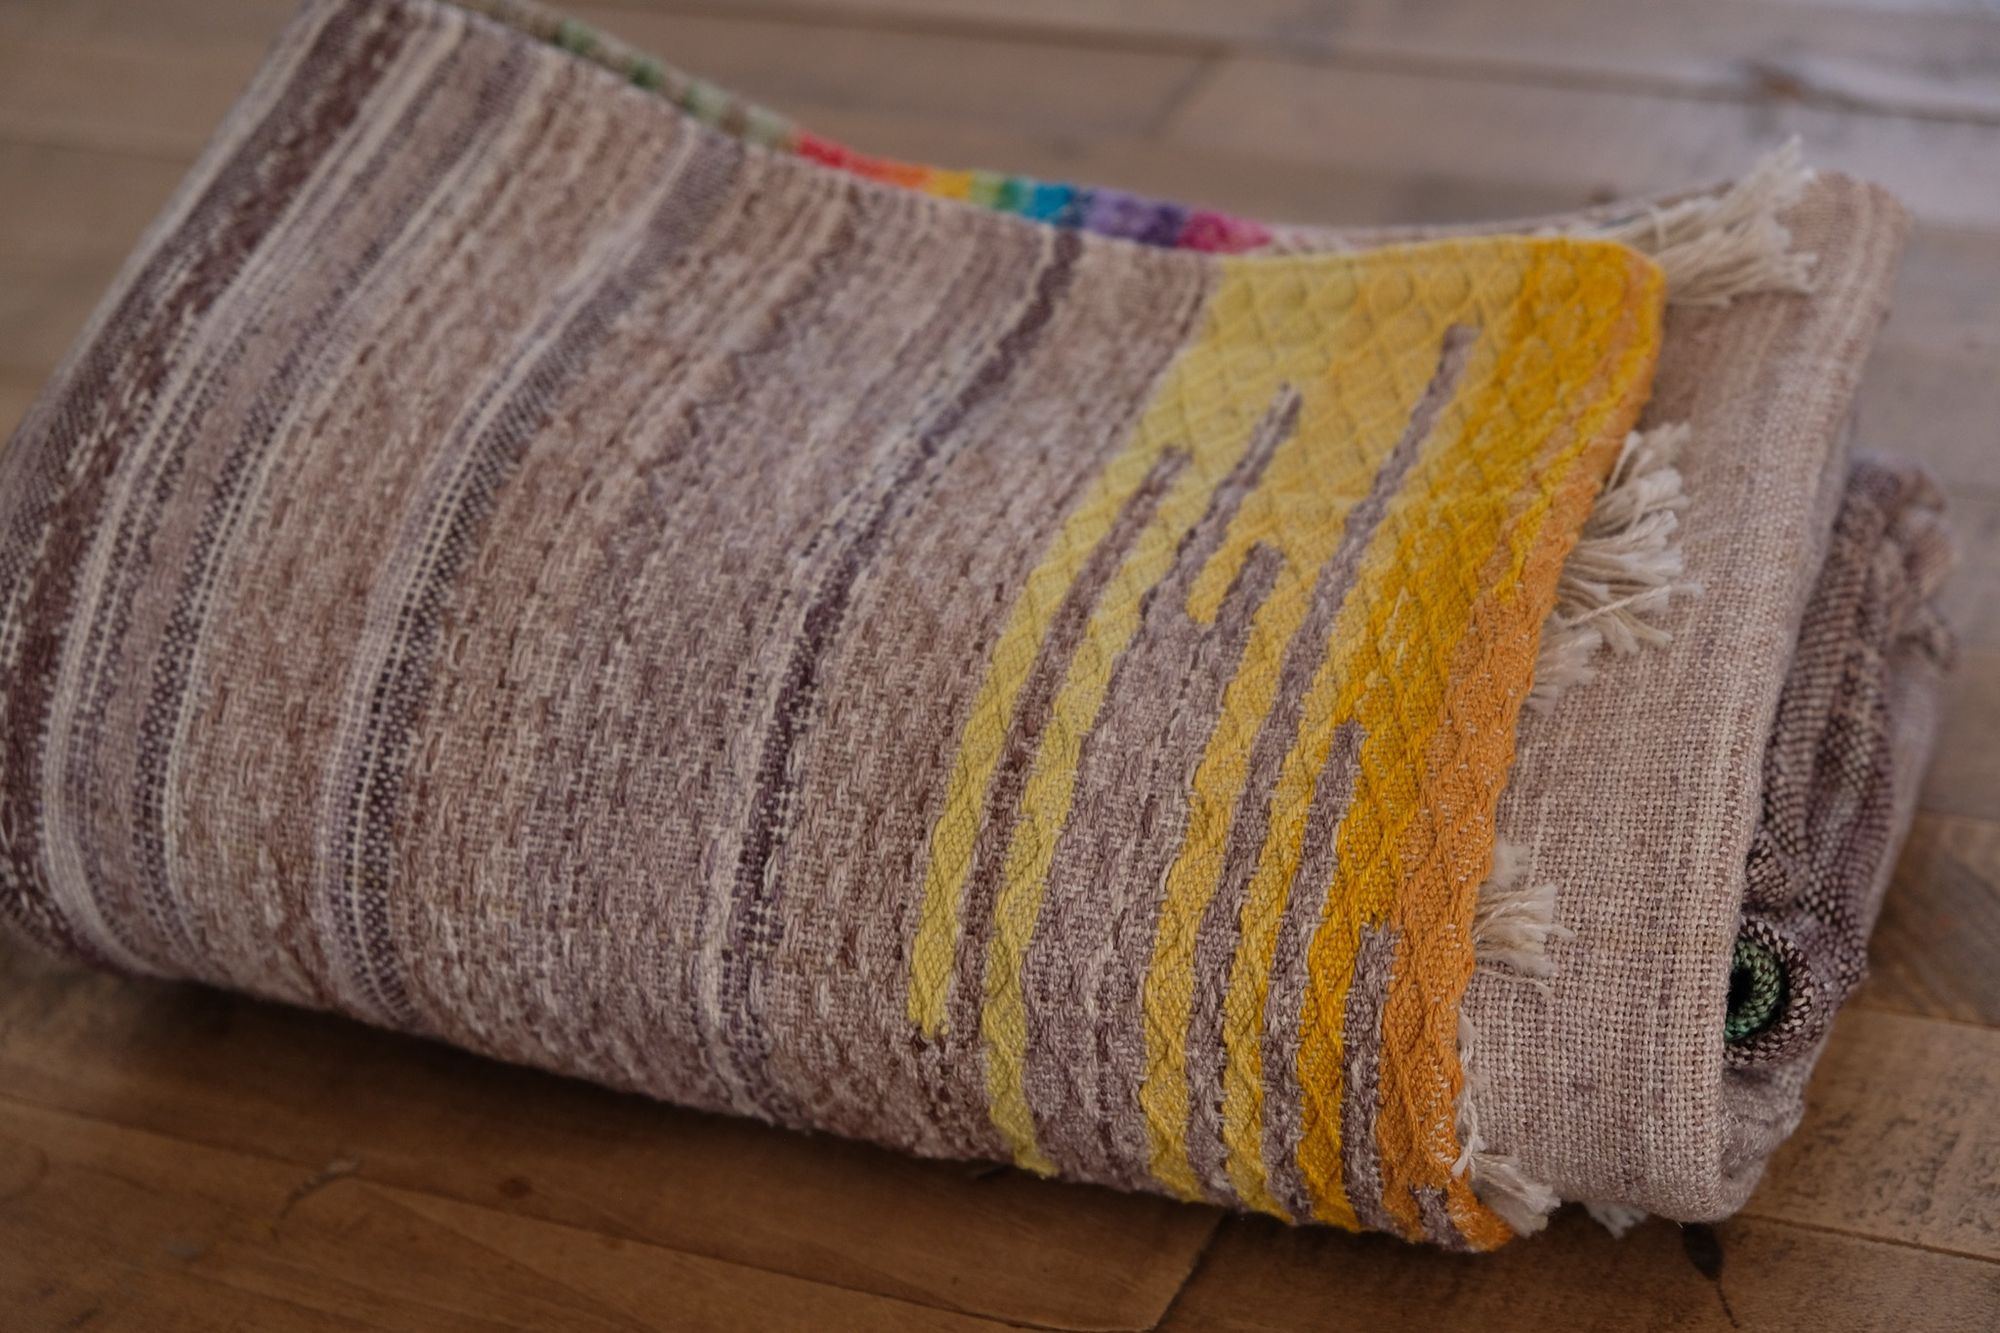 Handwoven raw silk fabric with textures diamond weave in browns, tans, purples, blues, yellows, pink and orange folded and laying on a wood floor